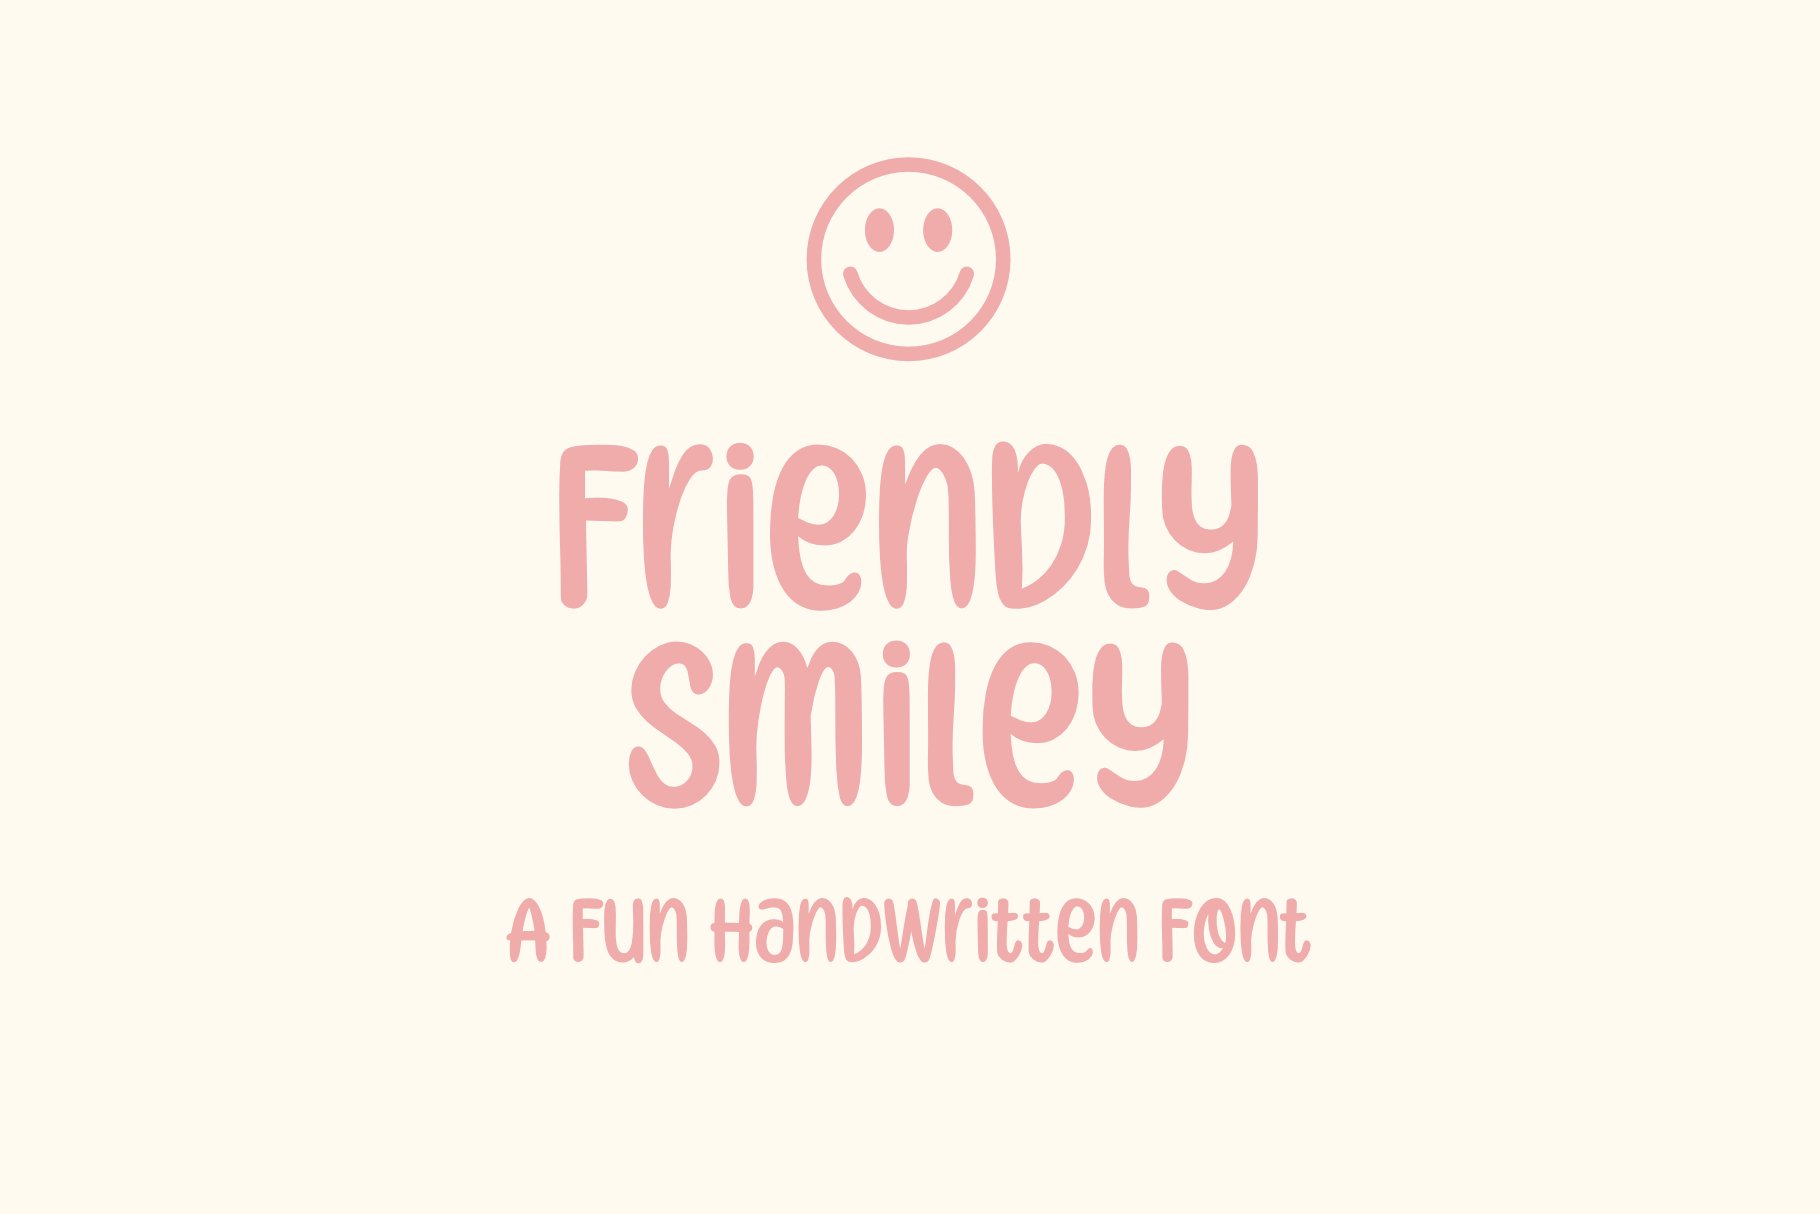 Friendly Smiley - a Fun Font cover image.